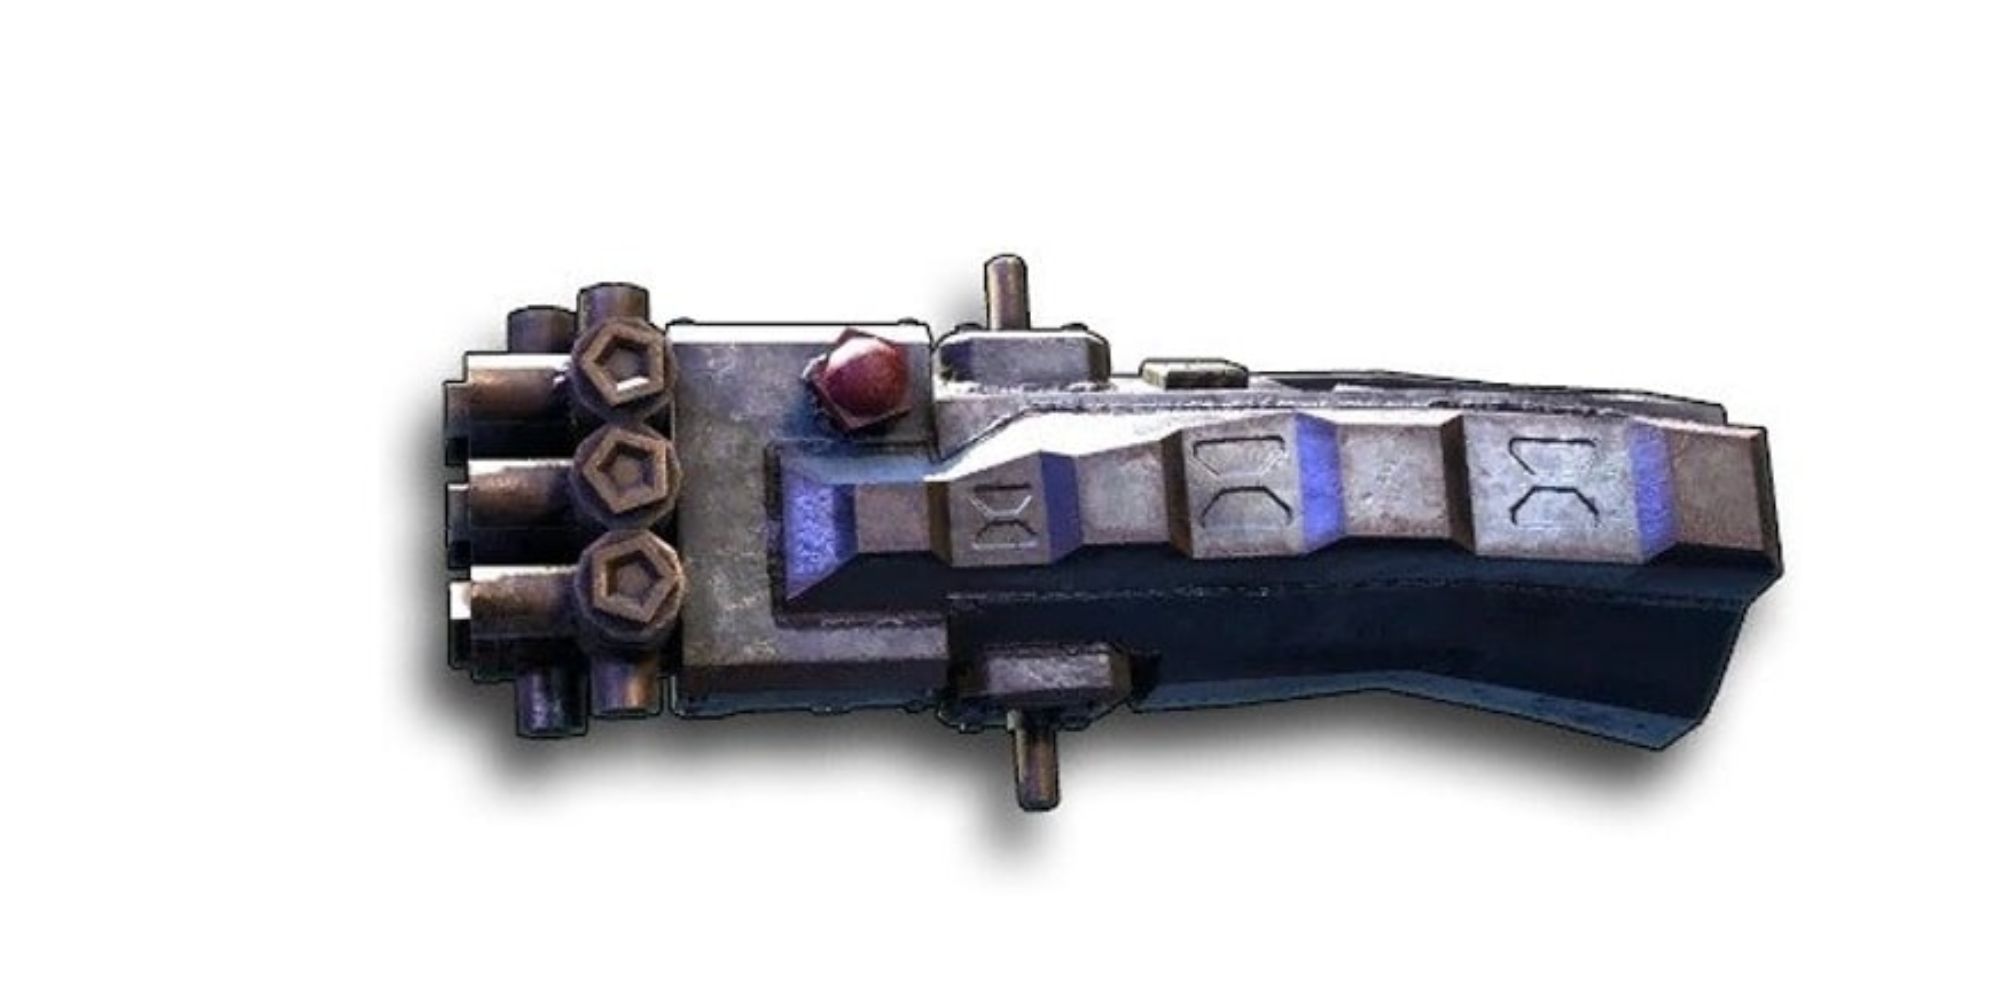 Close-up of Power Gauntlet weapon from Wasteland 3